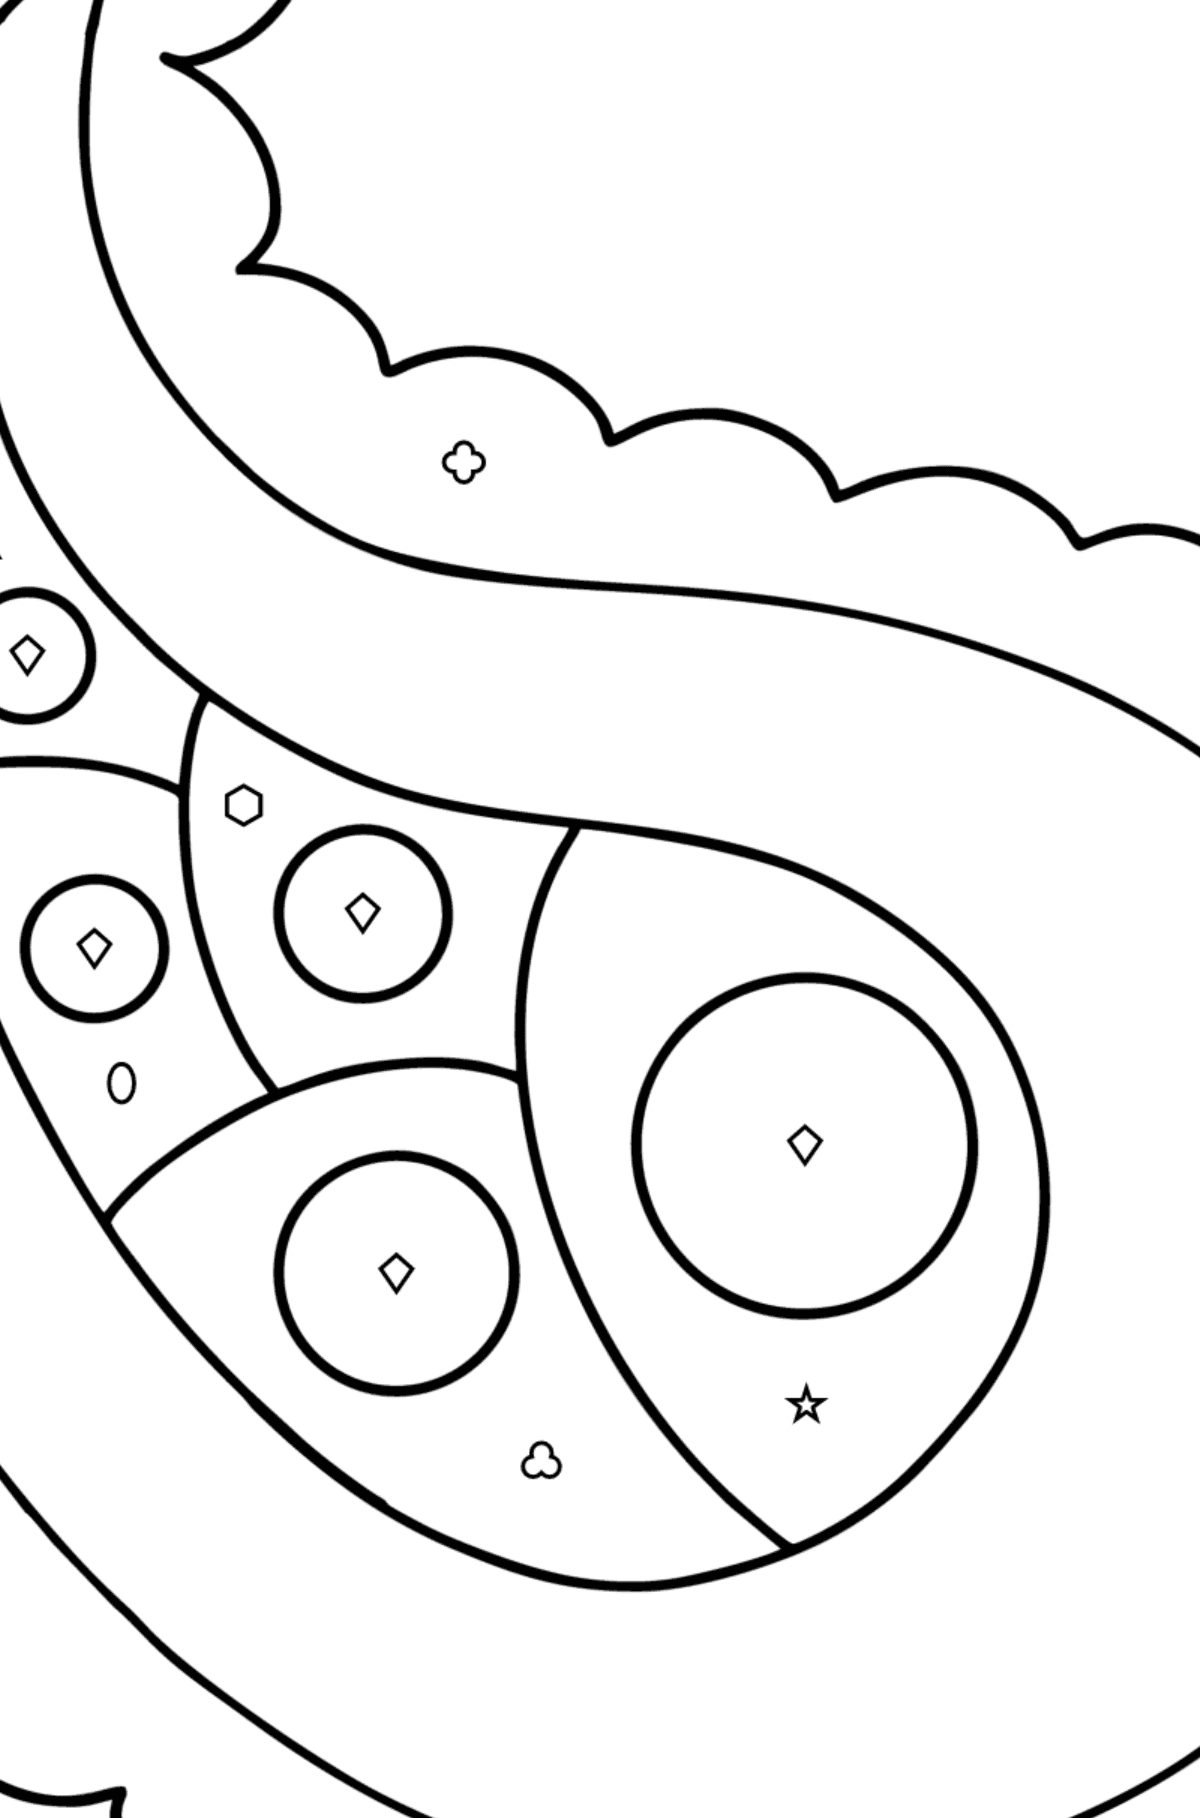 Kids Paisley coloring page - Coloring by Geometric Shapes for Kids